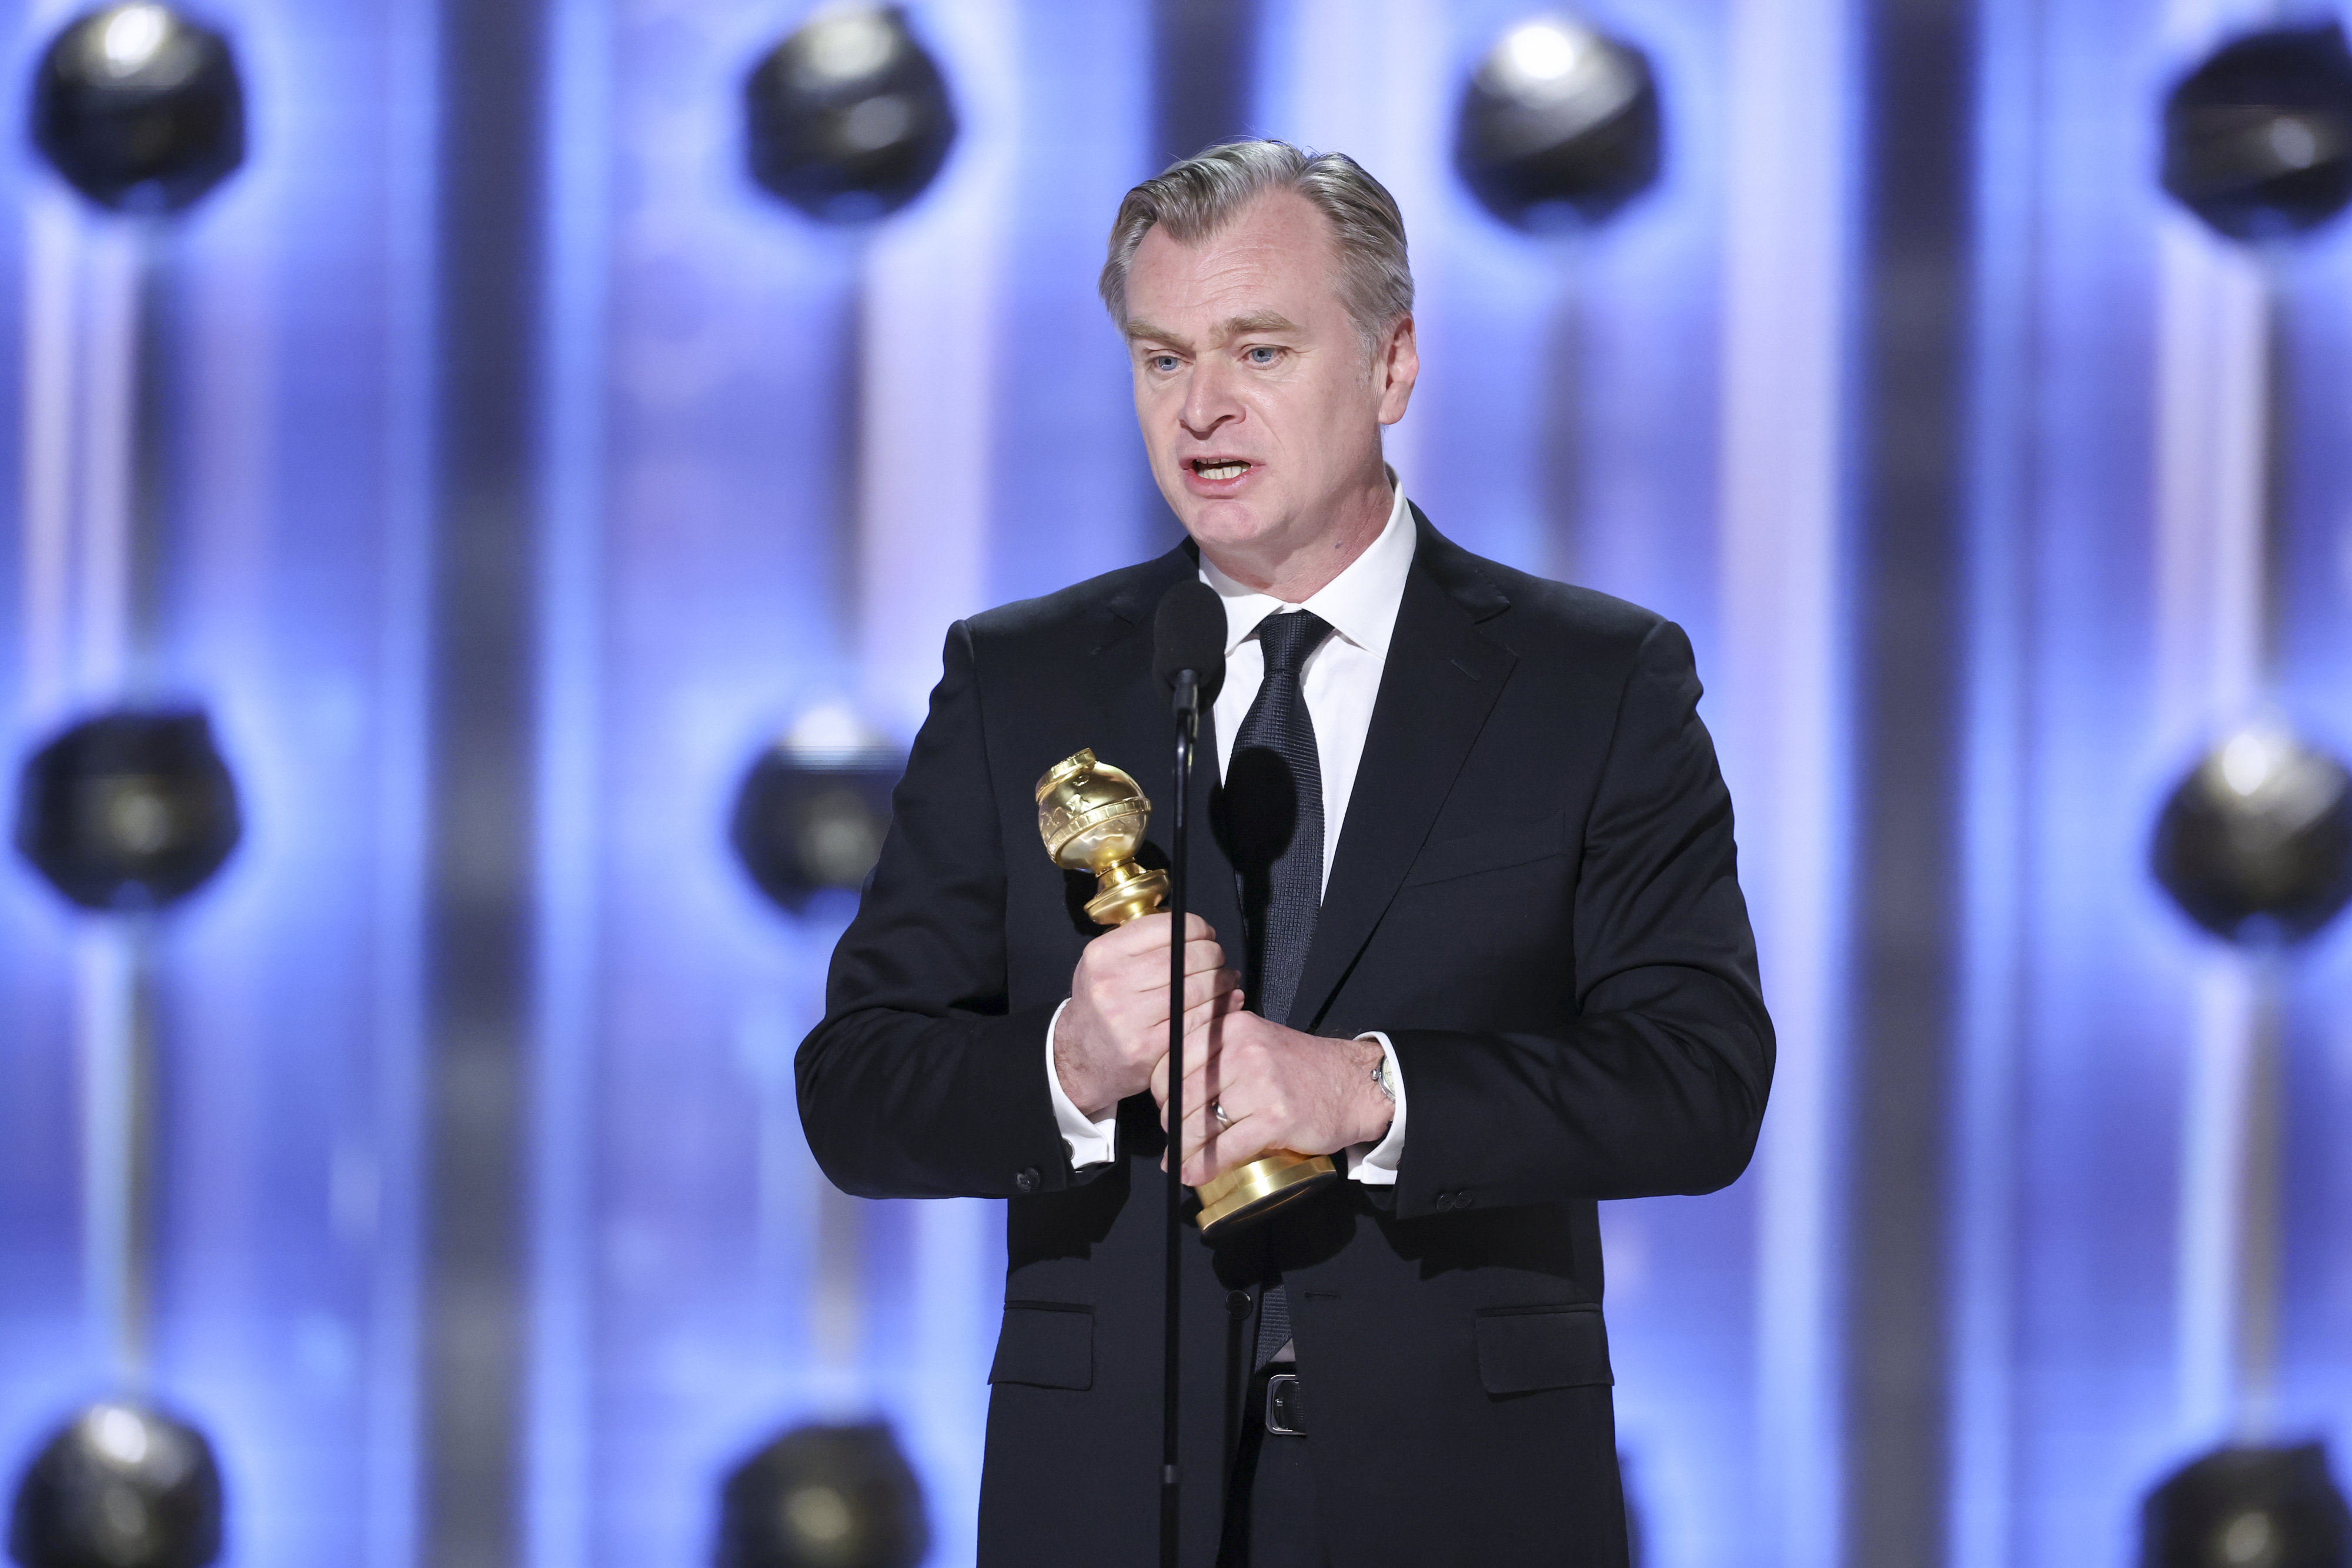 Christopher Nolan onstage accepting his award